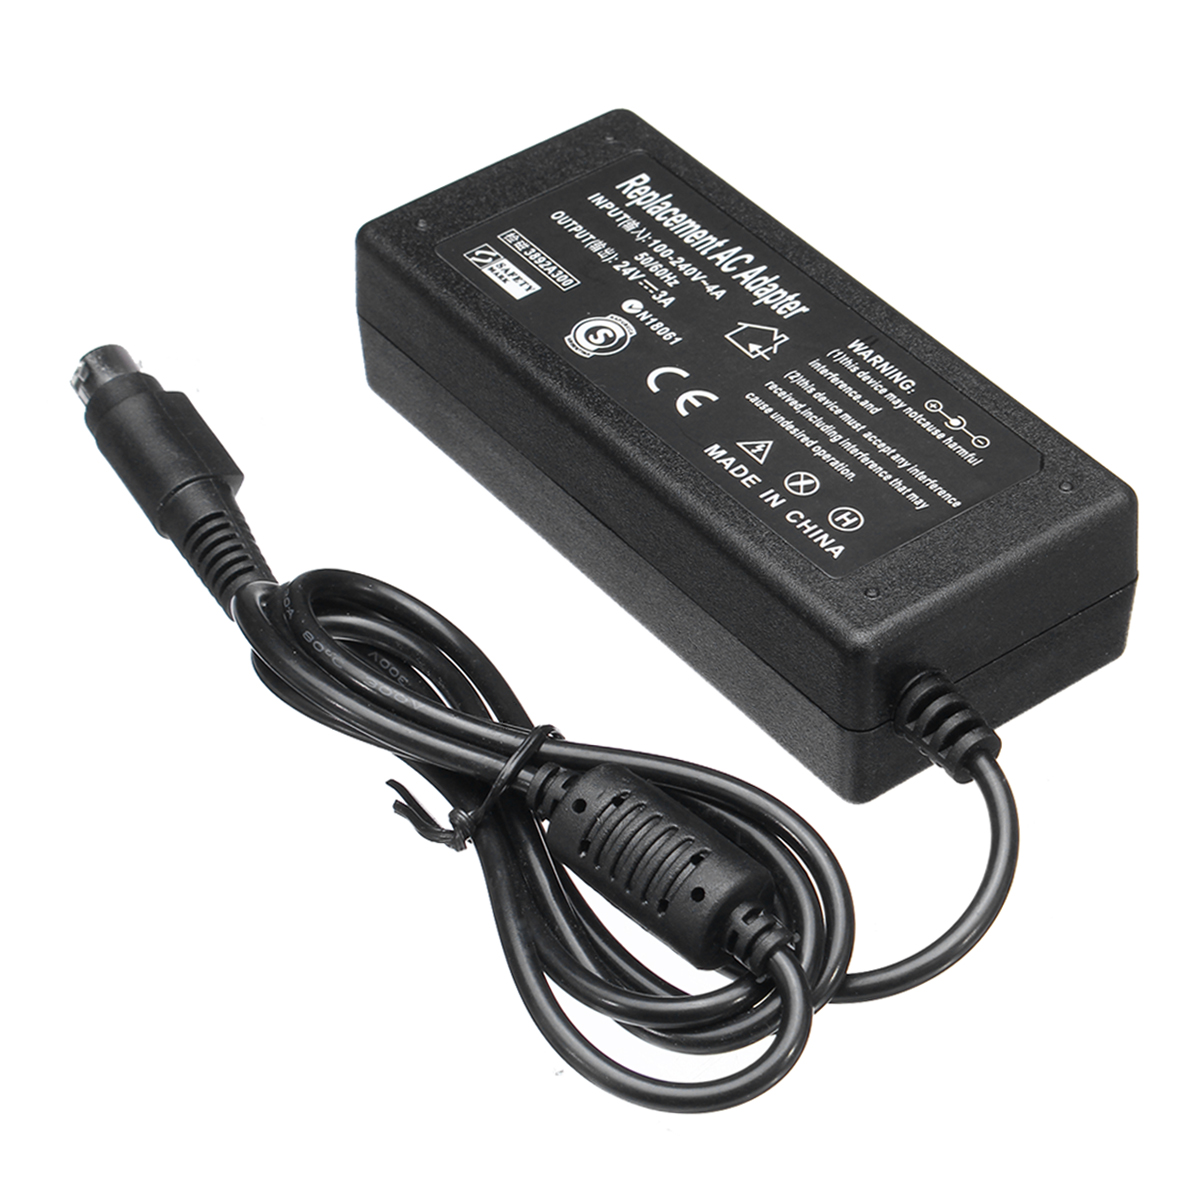 24V-3A-DC-3-Pin-Switching-Power-Supply-Adapter-Charger-100-240V-AC-Input-For-Printer-TV-Box-MP3-Came-1111657